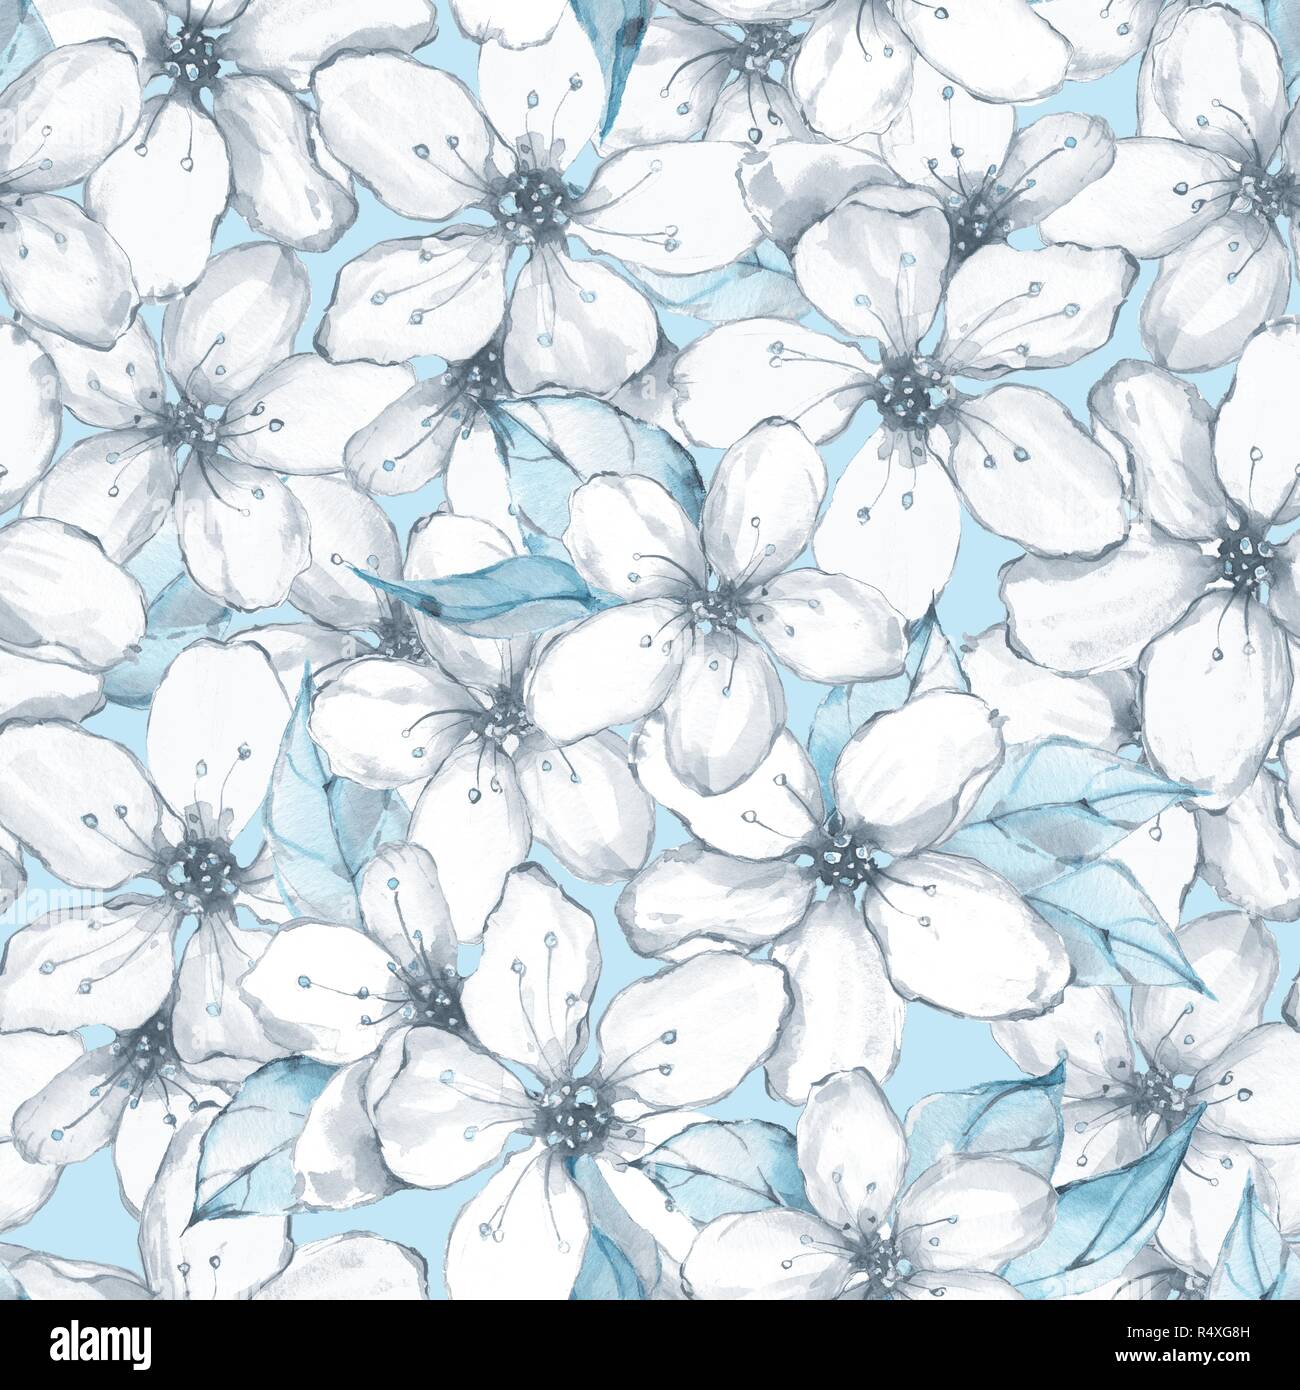 Floral seamless pattern with white flowers Stock Photo